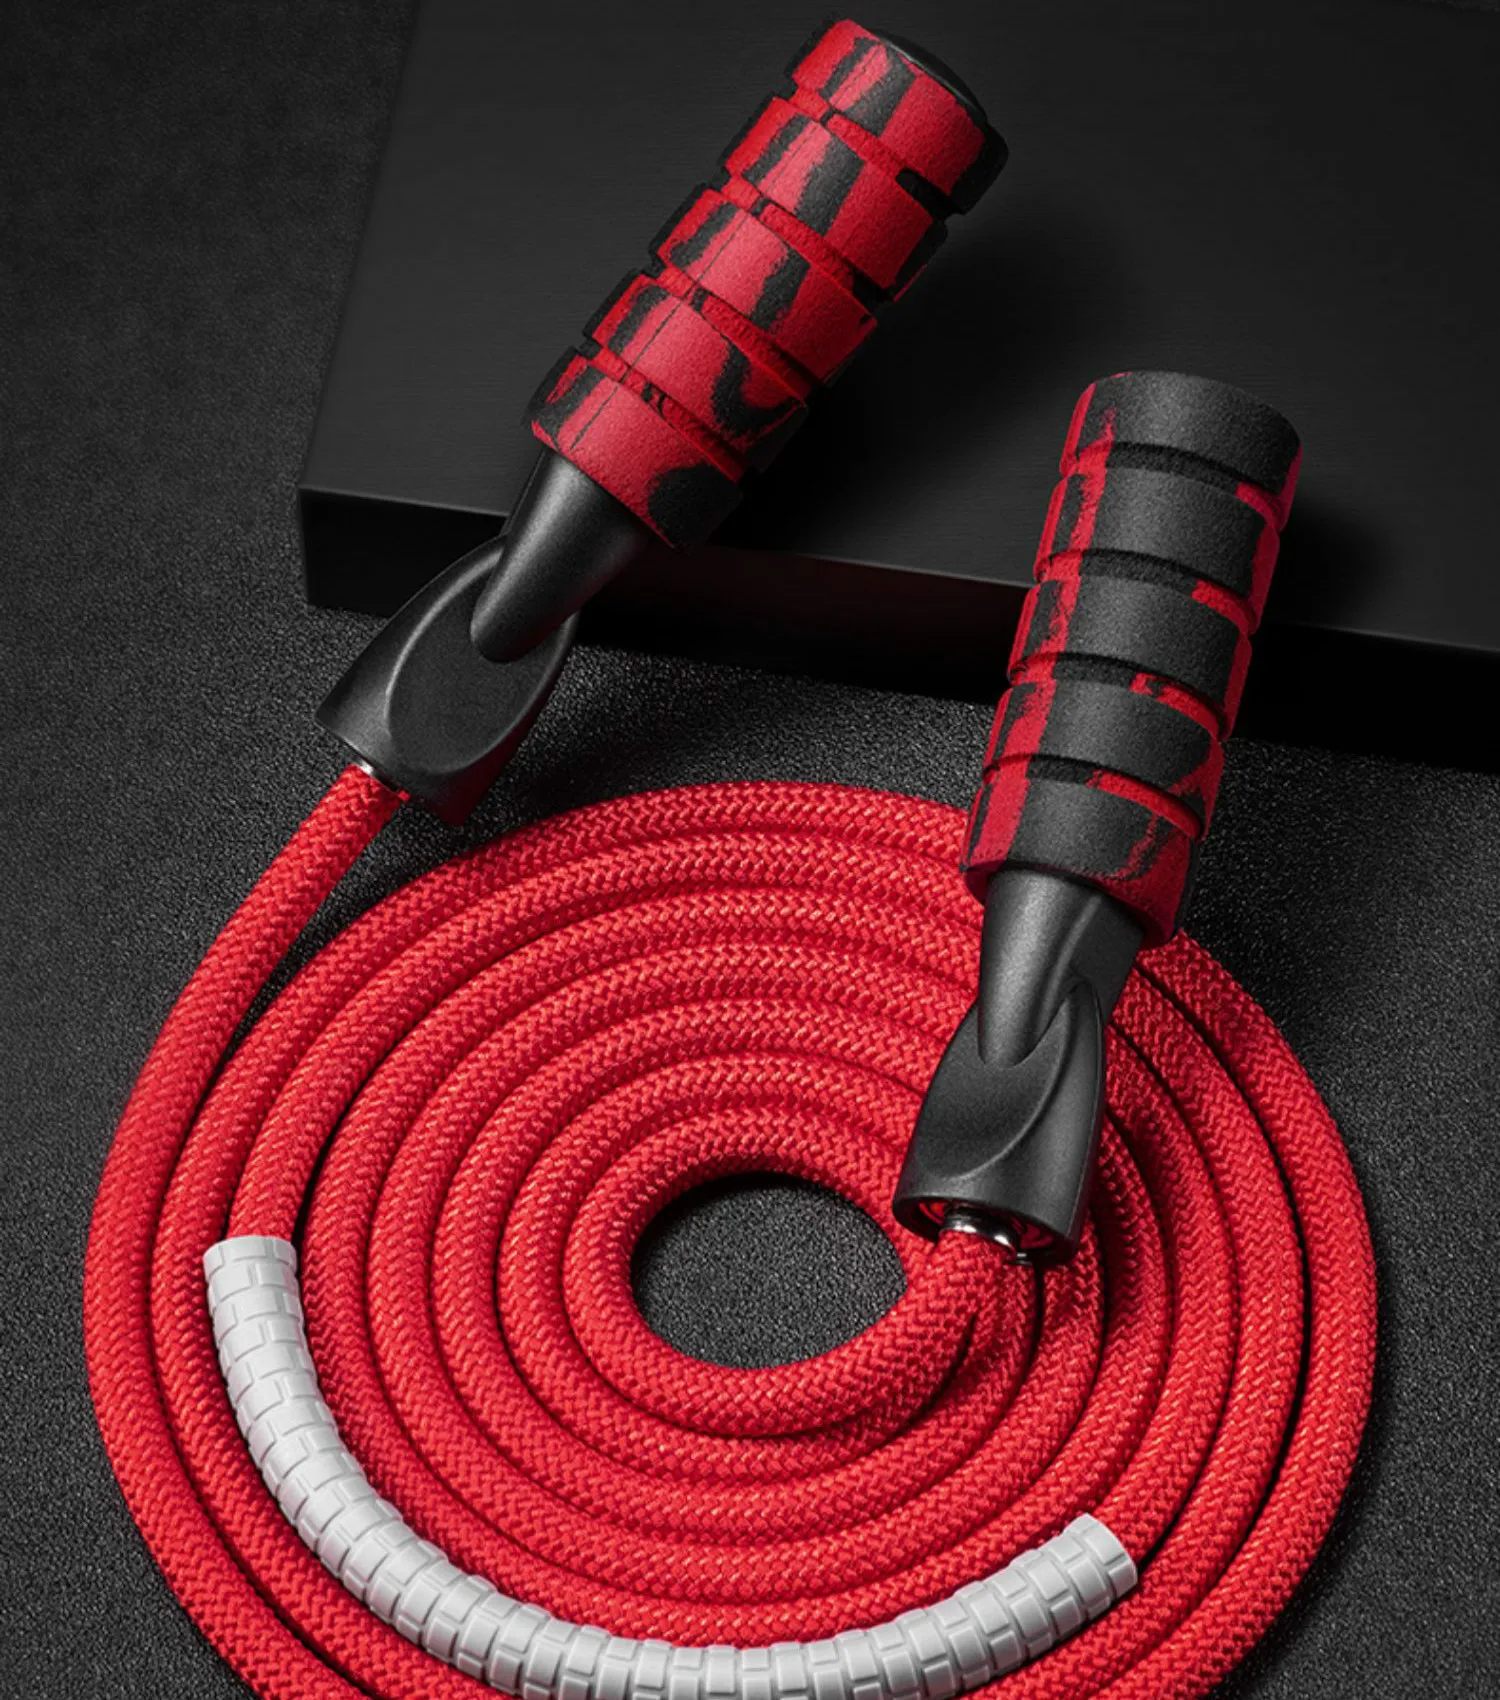 

3M Heavy Adjustable Weighted Skipping Jump Rope Ball-Bearing Weavon Cable Foam Handle for Home Gym Crossfit Workouts MMA Boxing